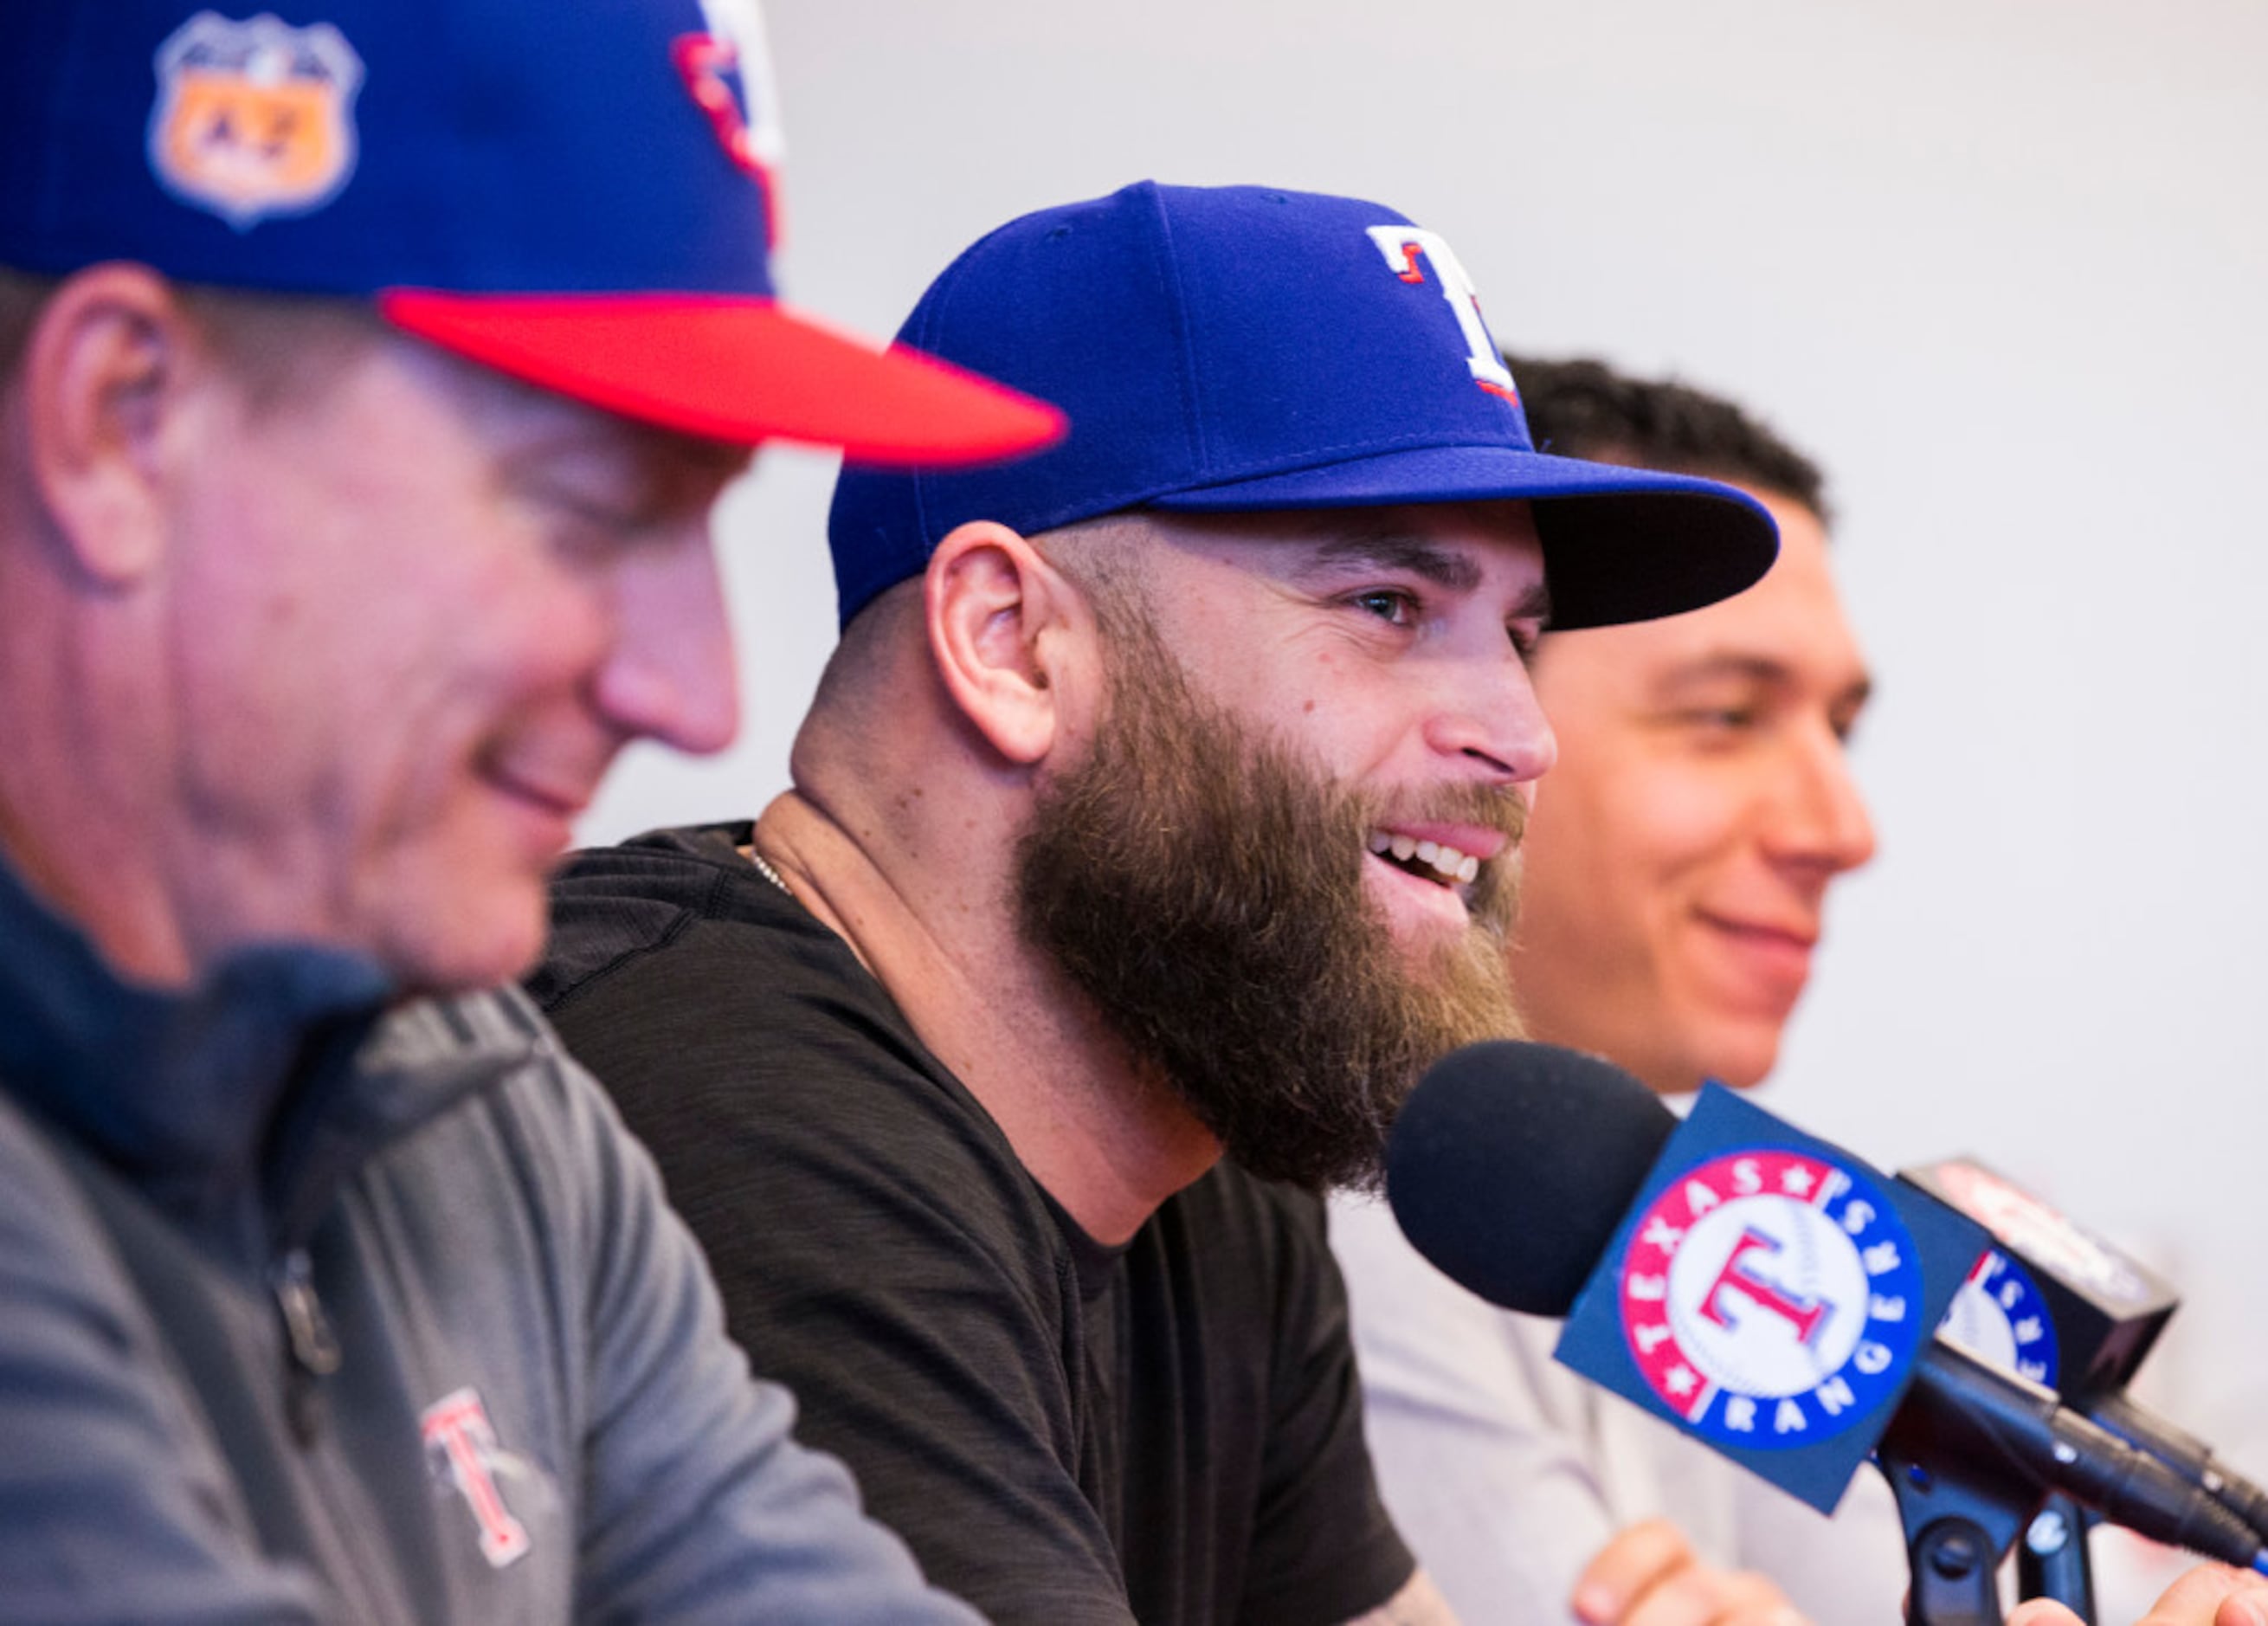 Rangers hope that chemical reactions Mike Napoli brings to clubhouse  results in late October baseball